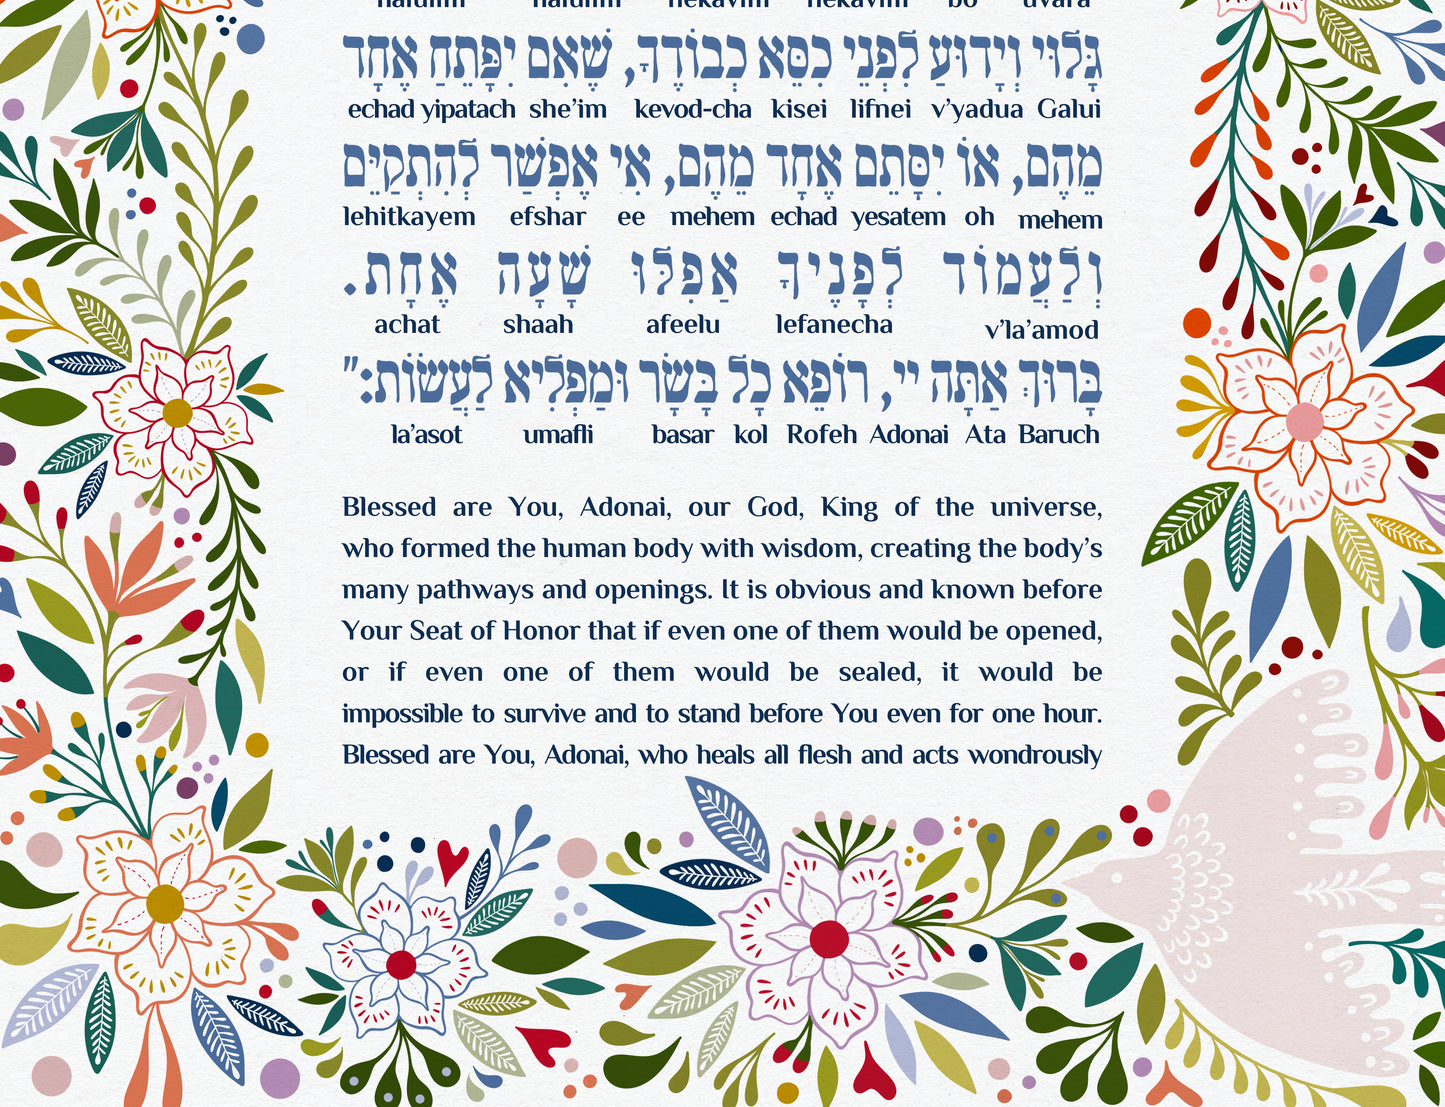 Asher Yatzar Colorful Hebrew and English